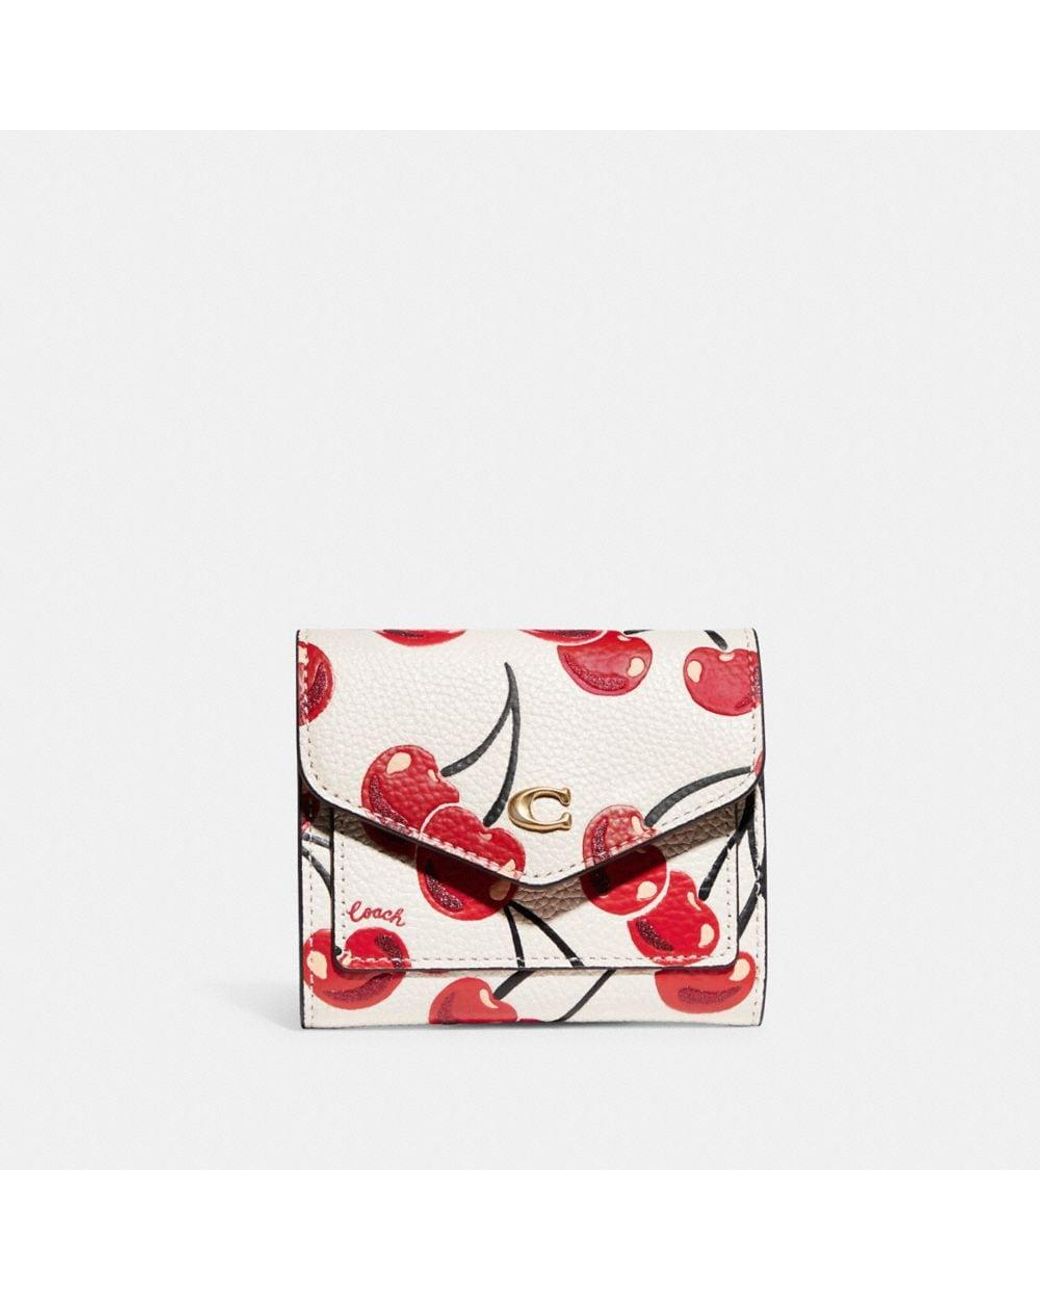 COACH Wyn Small Wallet With Cherry Print in Red | Lyst Canada